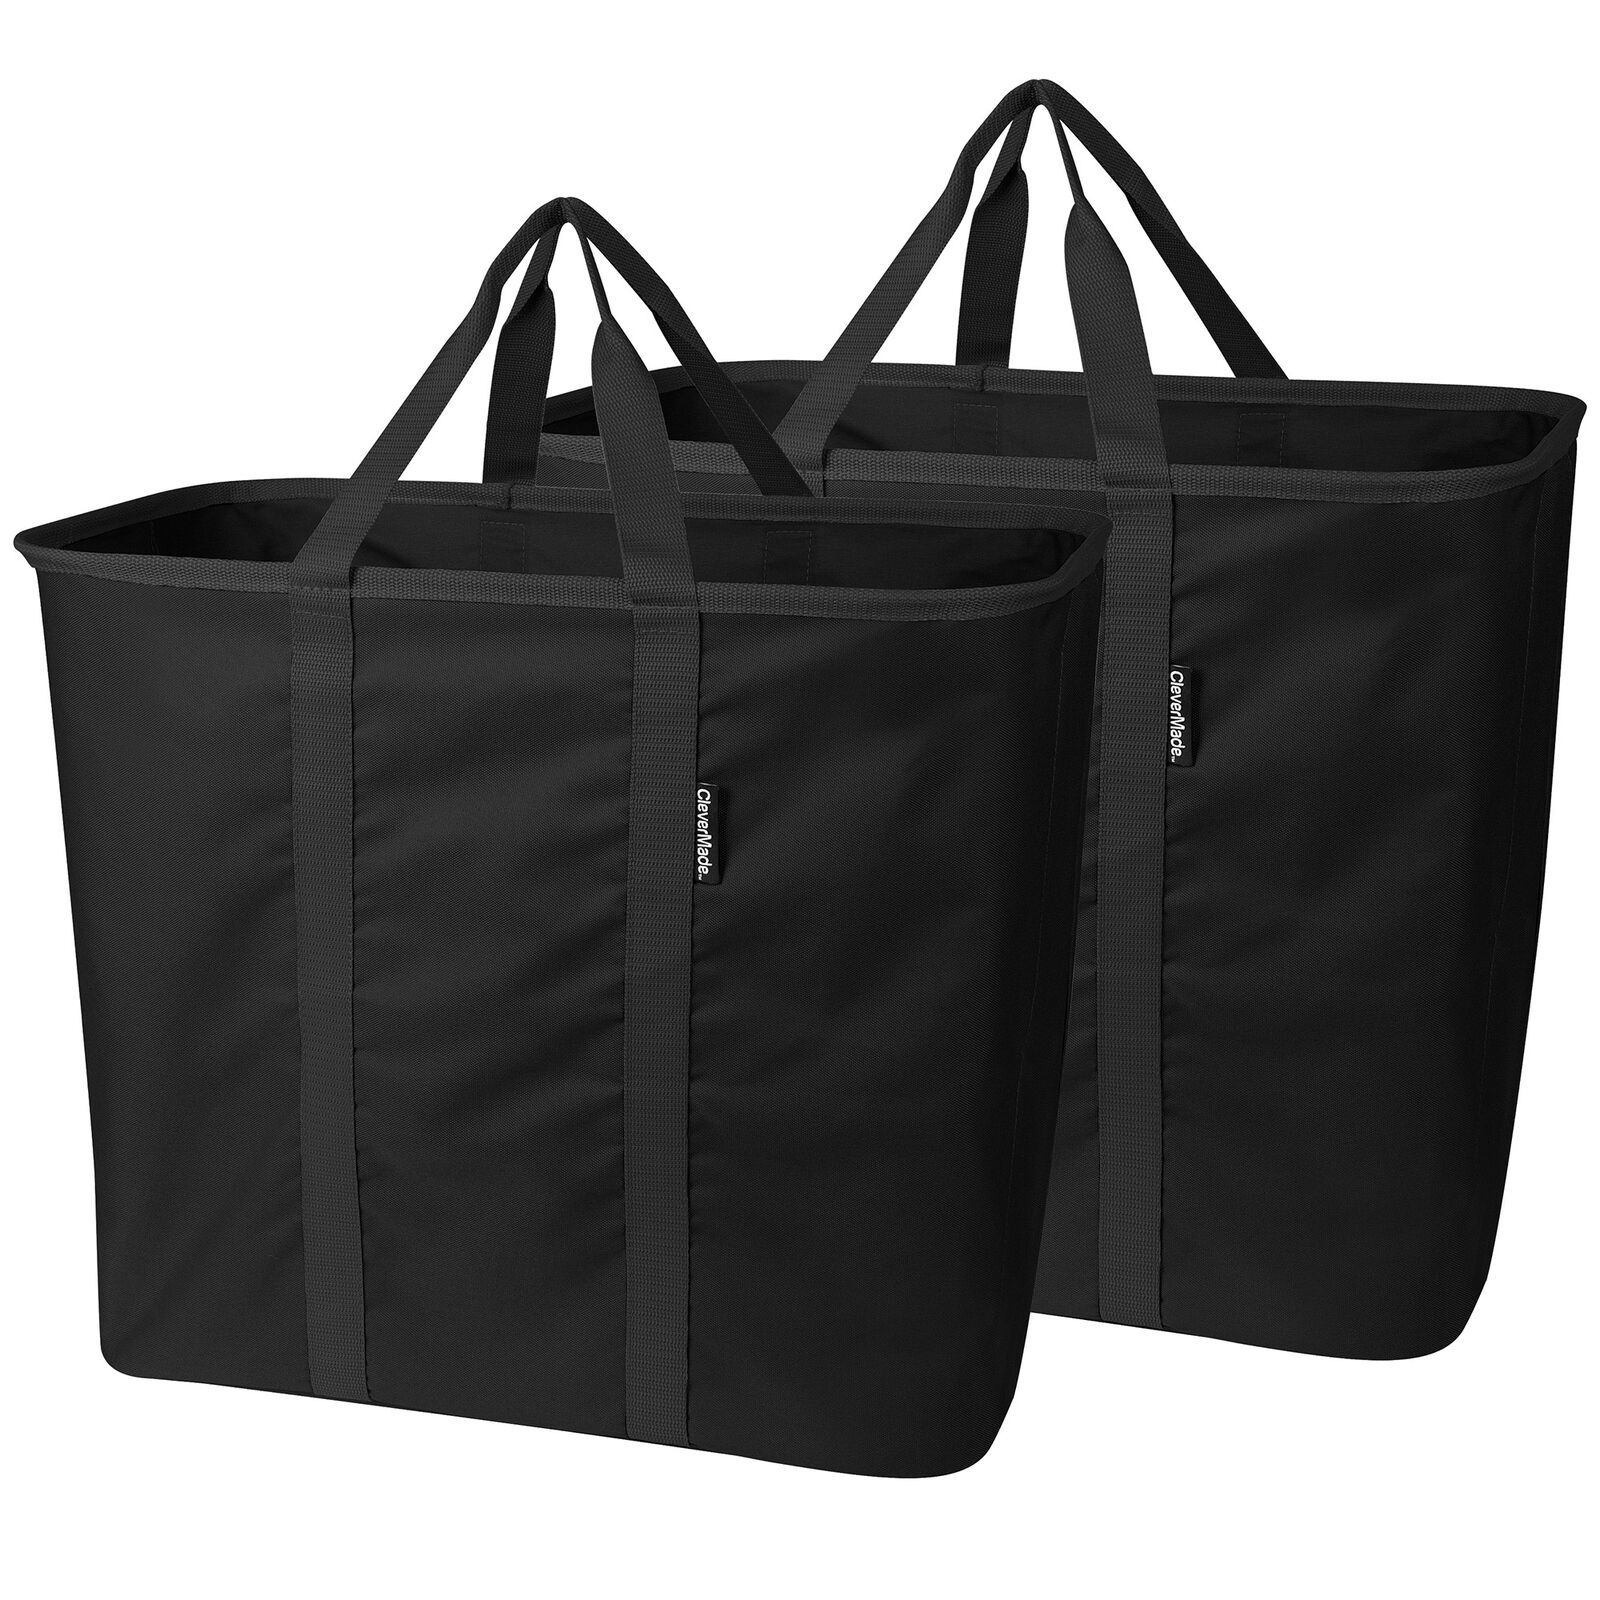 All Purpose Laundry Caddy, 2-Pack - $54.53